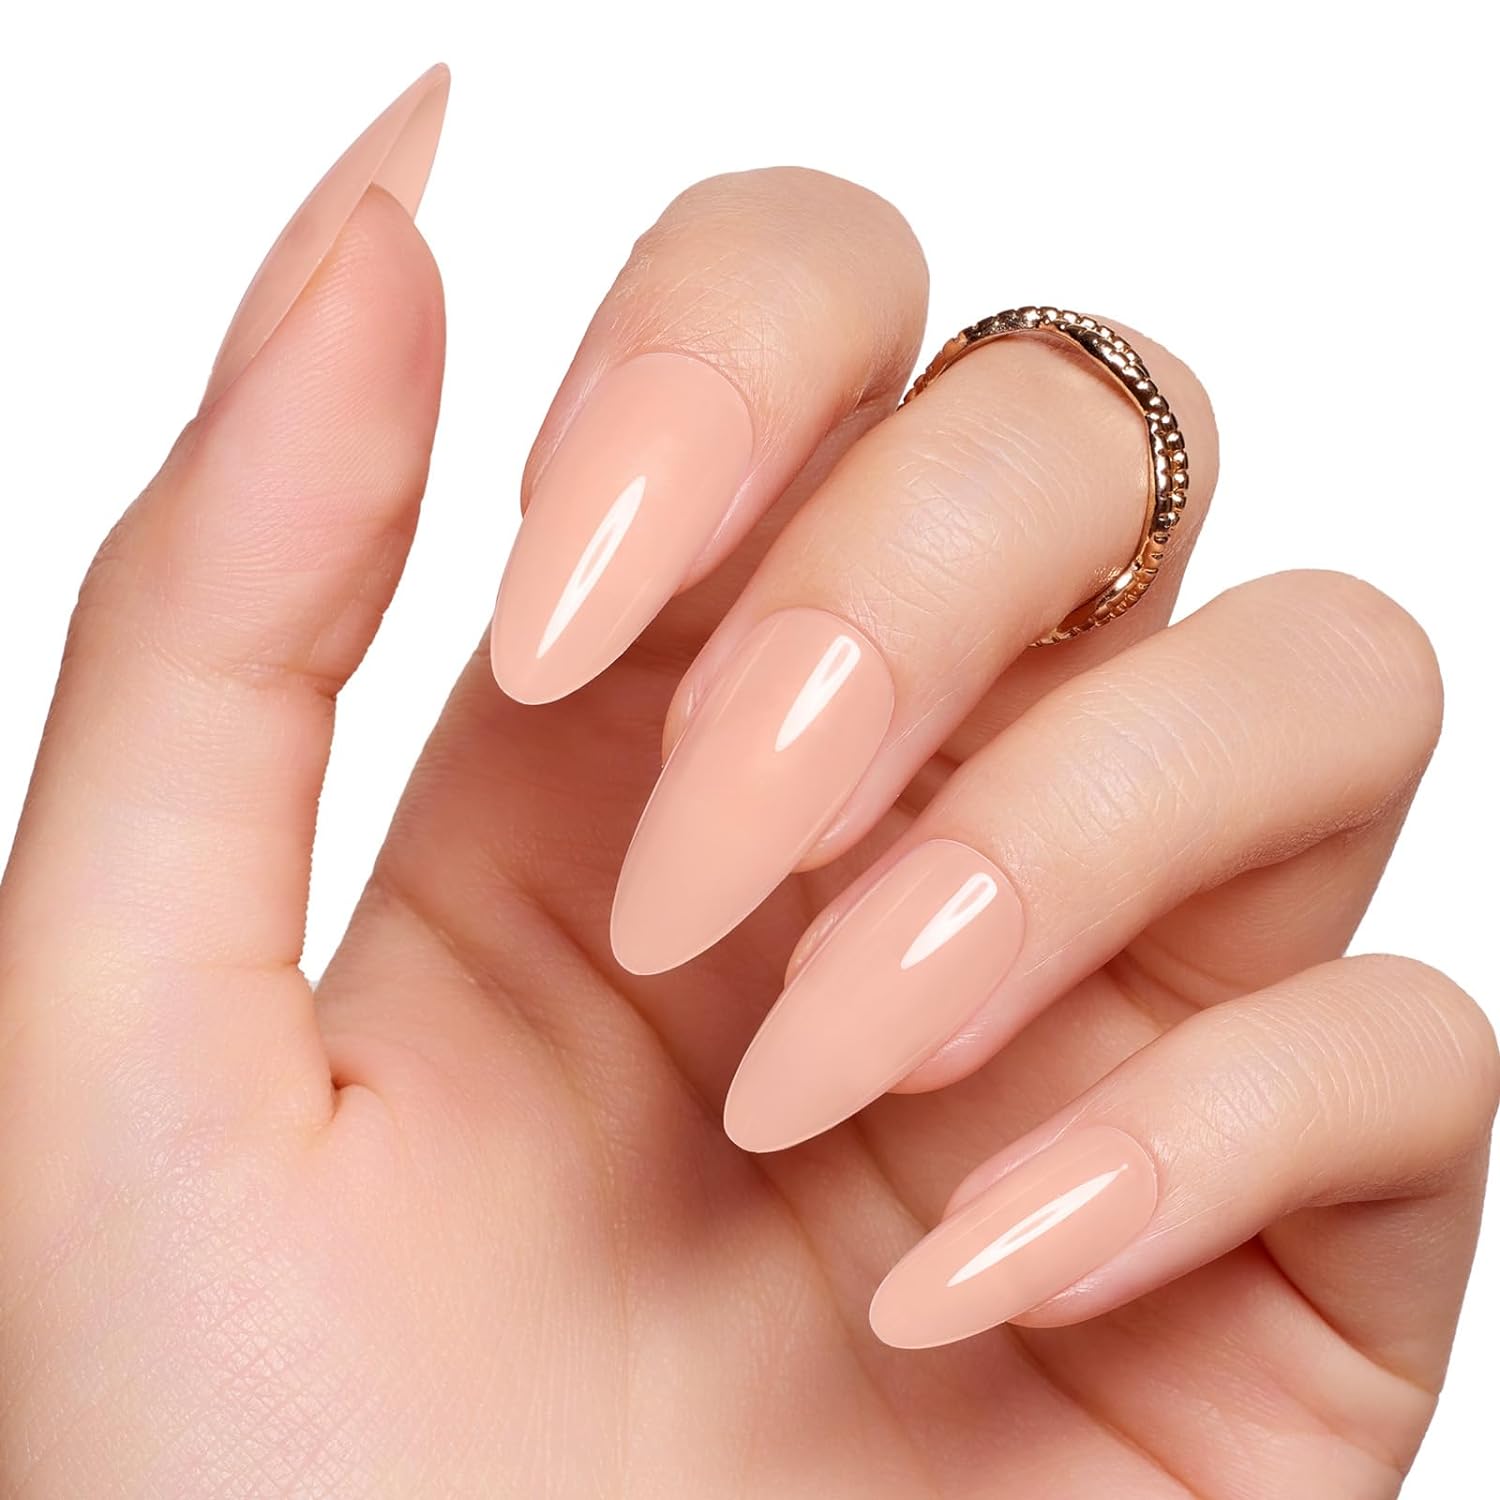 Sheer Nude | Medium Almond Press On Nails 24 Pcs in 12 Sizes